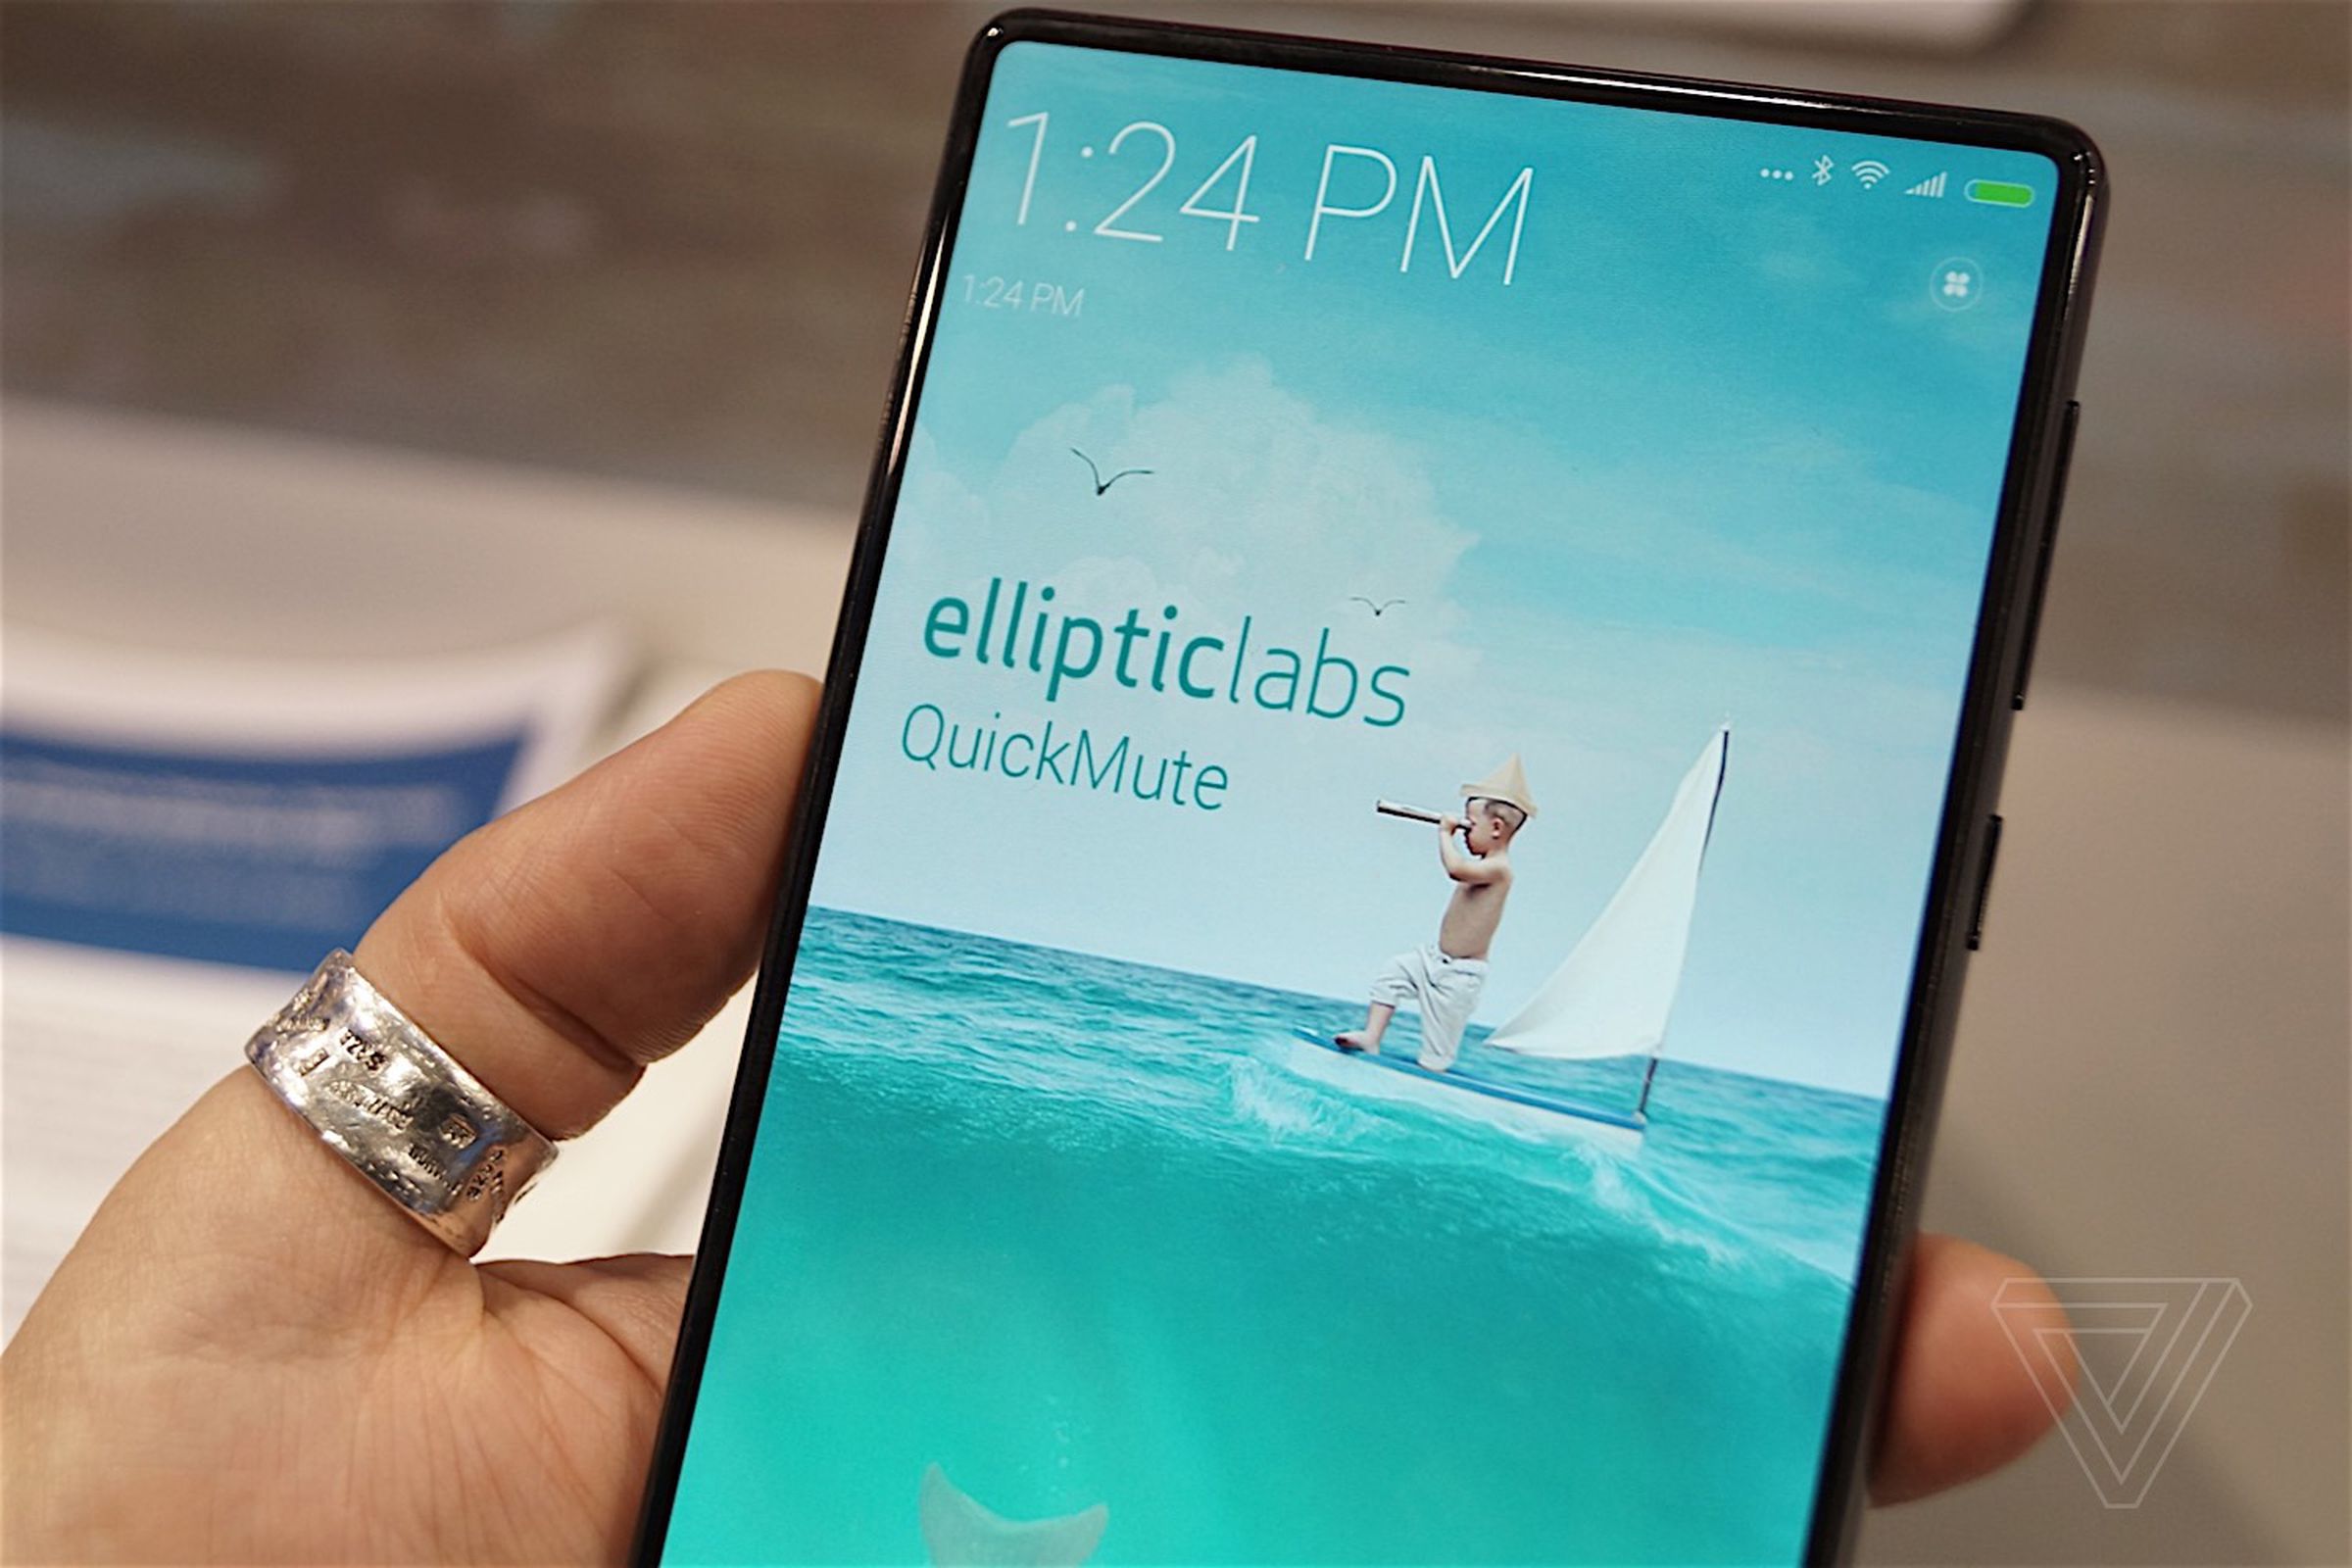 Elliptic Labs’ technology was used to help eliminate the bezel in Xiaomi’s Mi Mix phone.